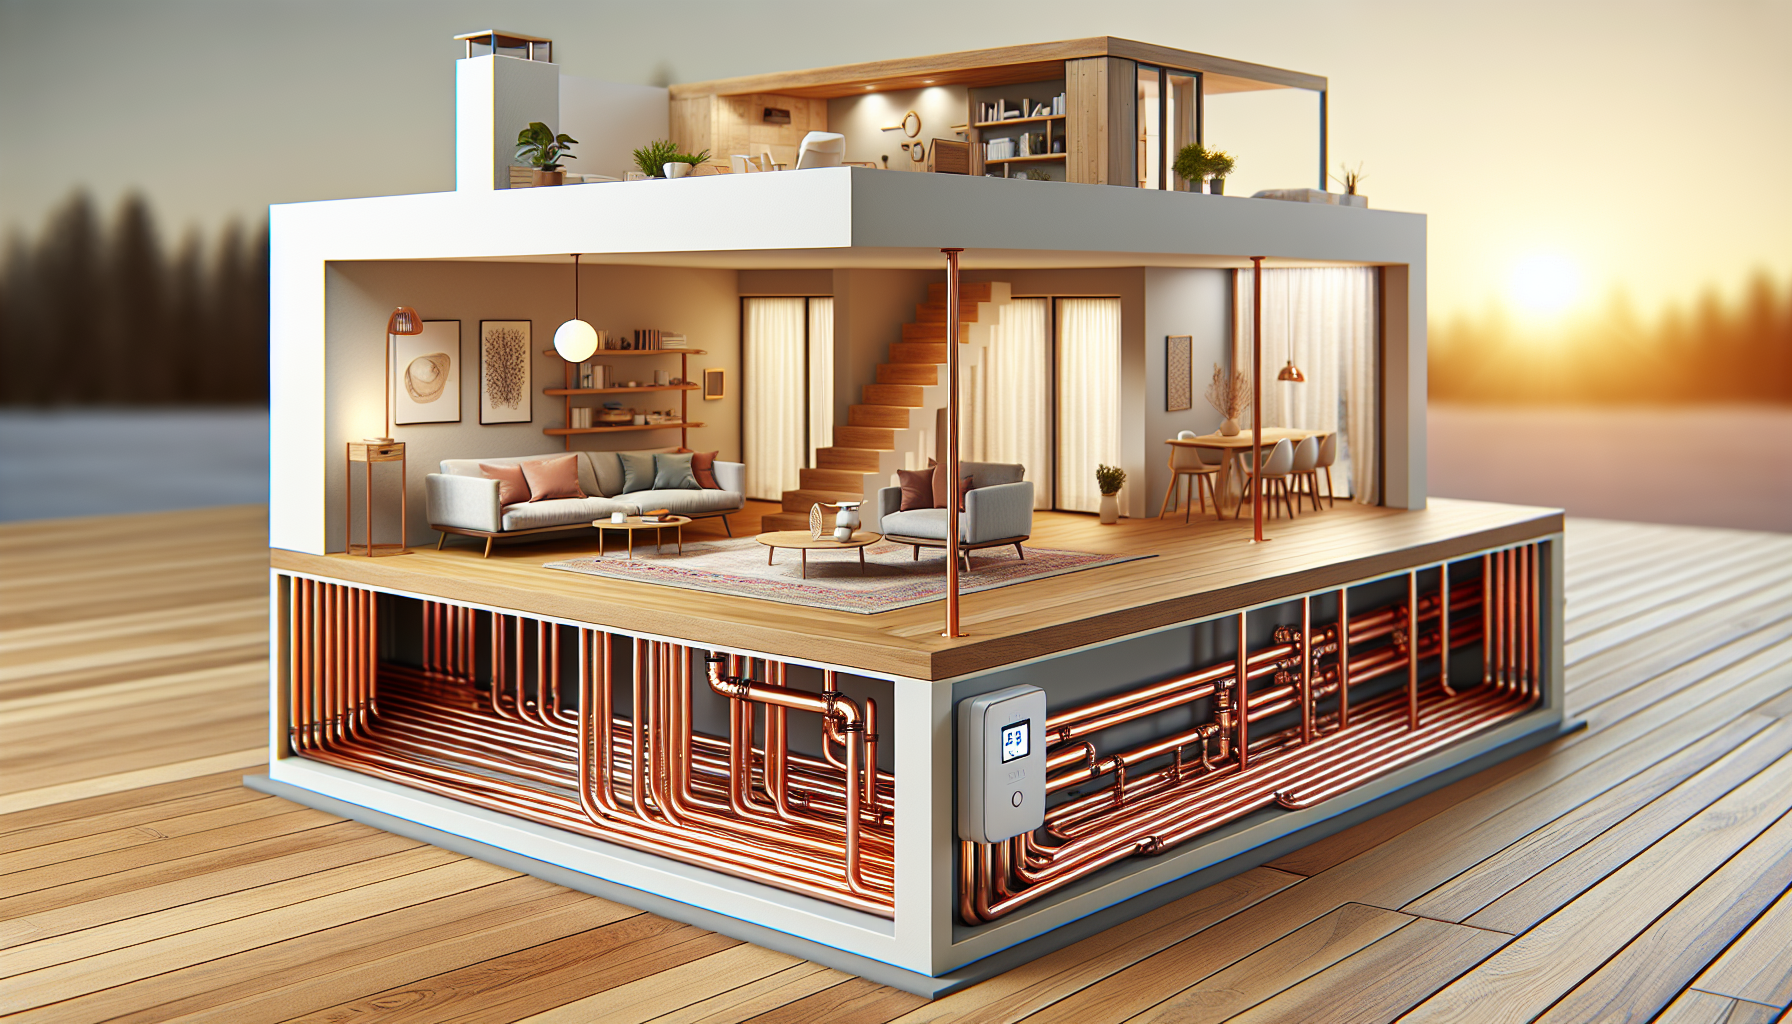 Hydronic heating system with radiant heat